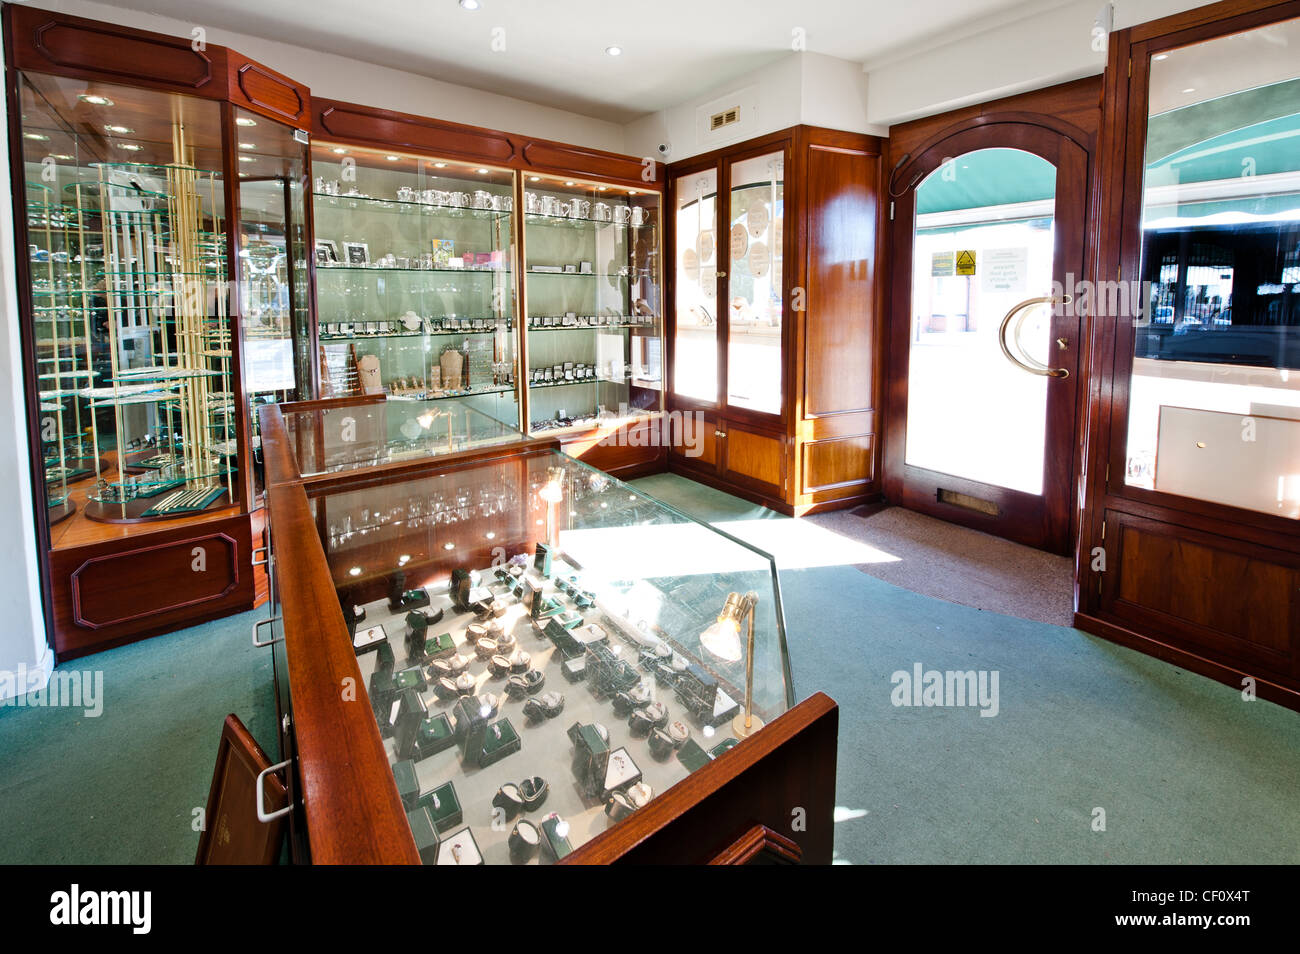 Robbery Shop High Resolution Stock Photography and Images - Alamy